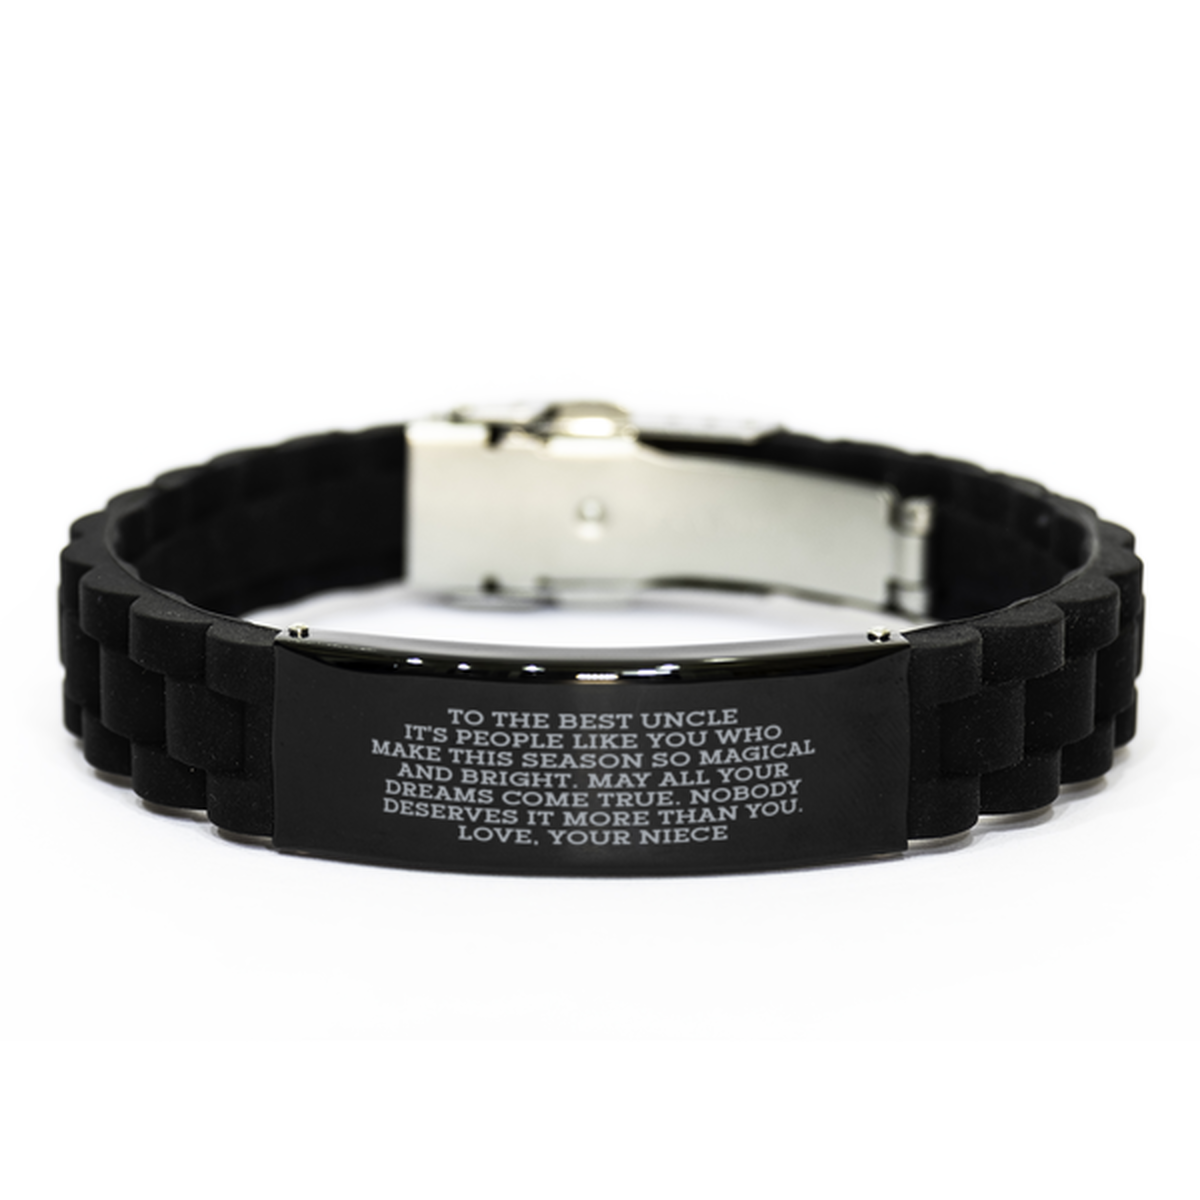 To My Uncle Black Bracelet, May All Your Dreams Come True, Fathers Day Gifts For Uncle From Niece, Birthday Gifts For Men